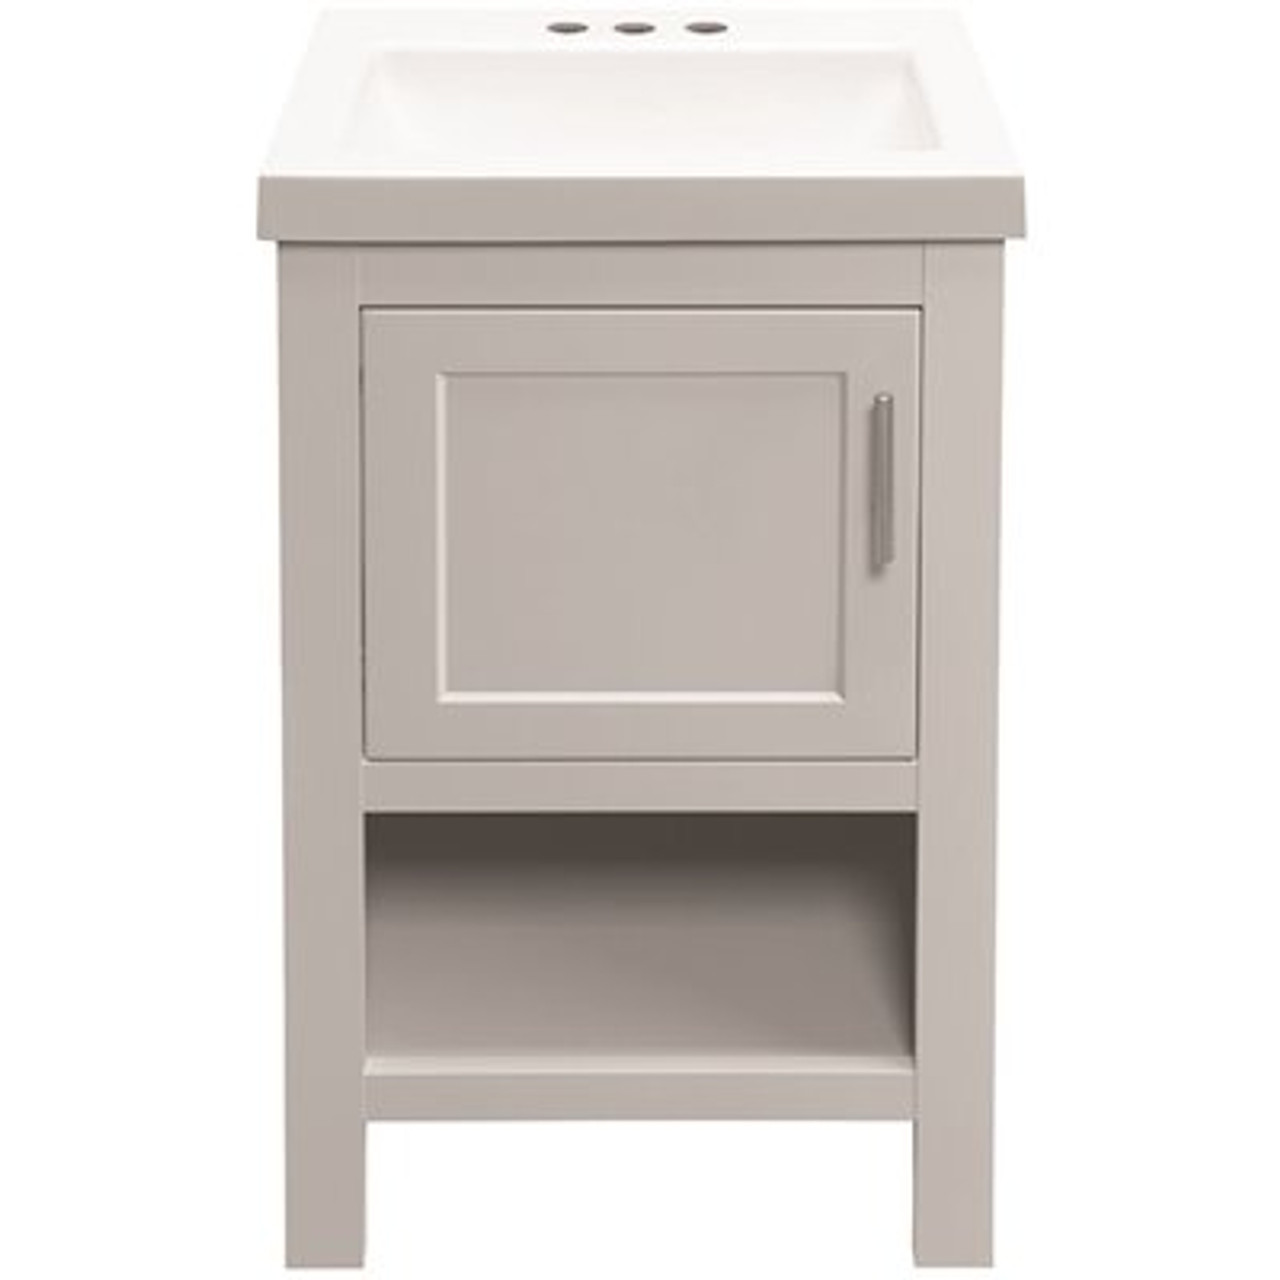 Glacier Bay Spa 18.5 In. W D Bath Vanity In Dove Gray With Cultured Marble Vanity Top In White With White Basin